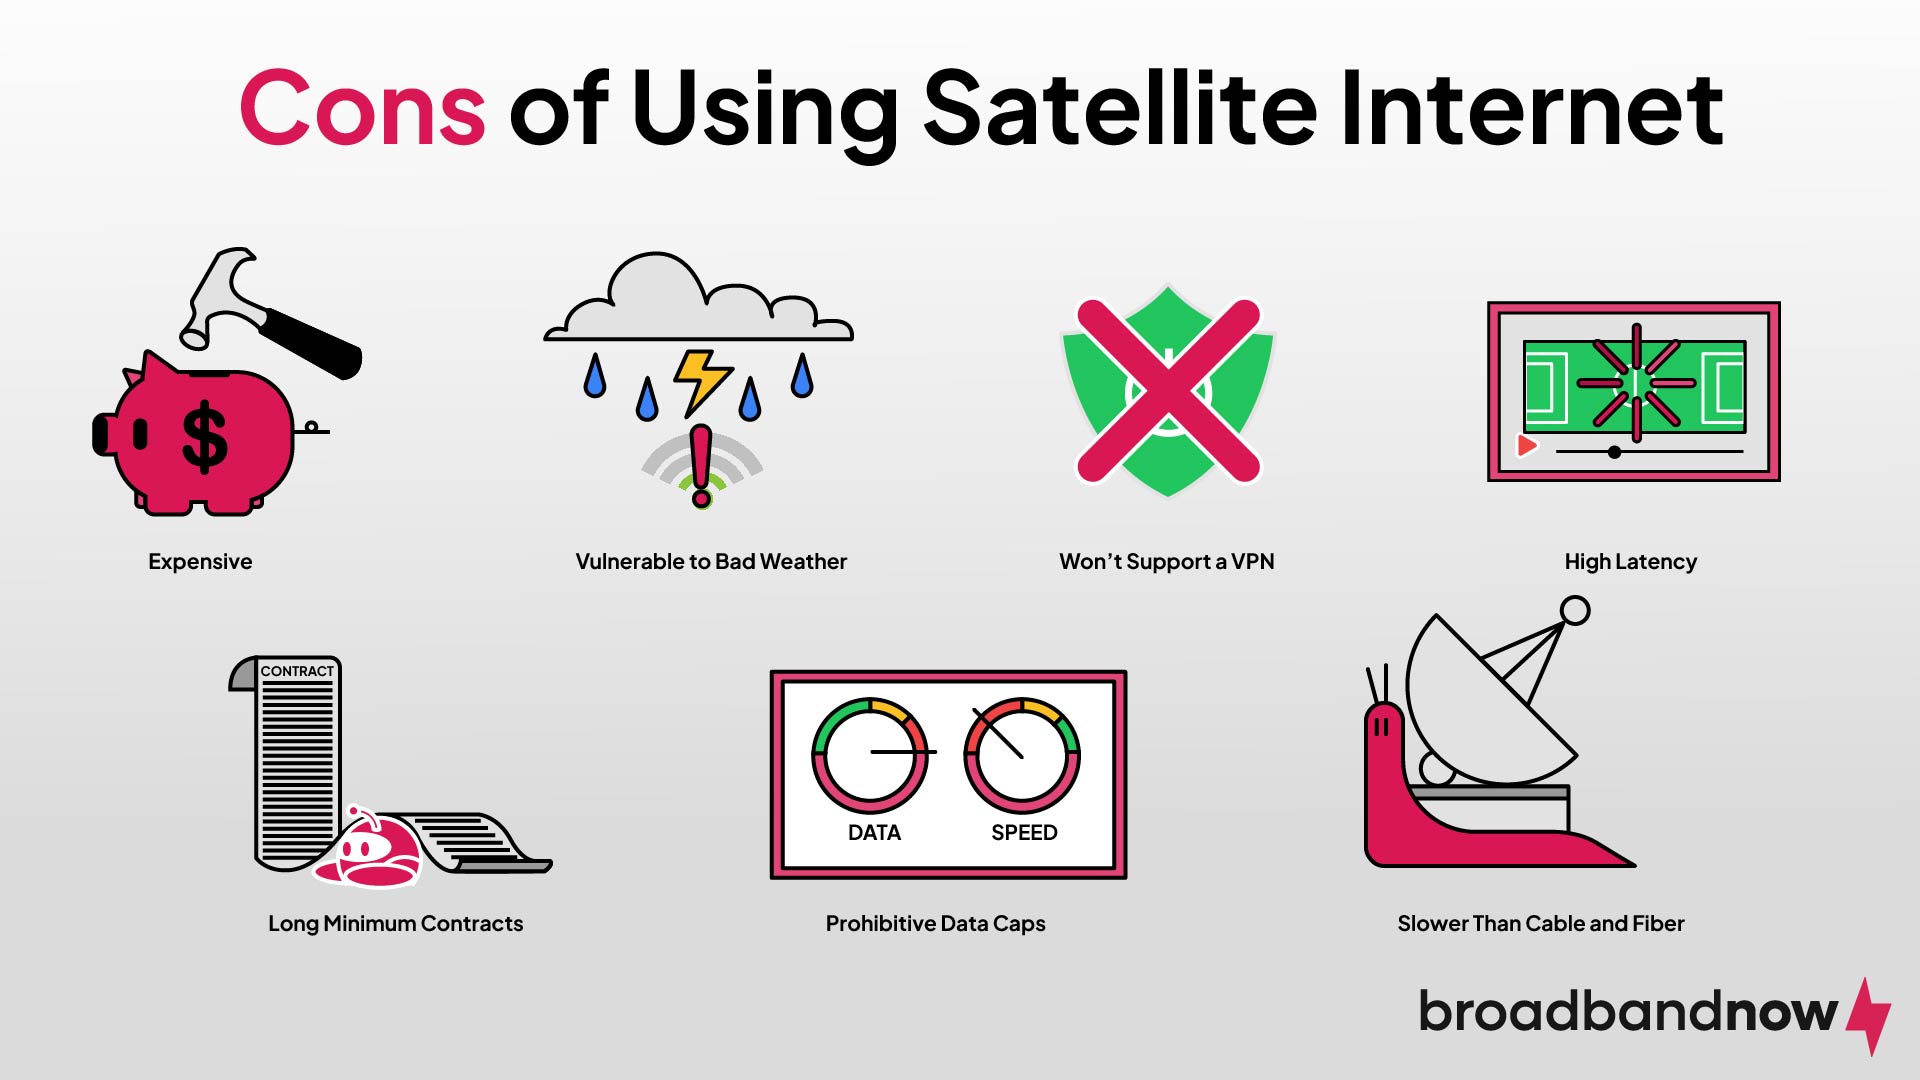 A graphic design image depicting the cons of satellite internet via various icons.